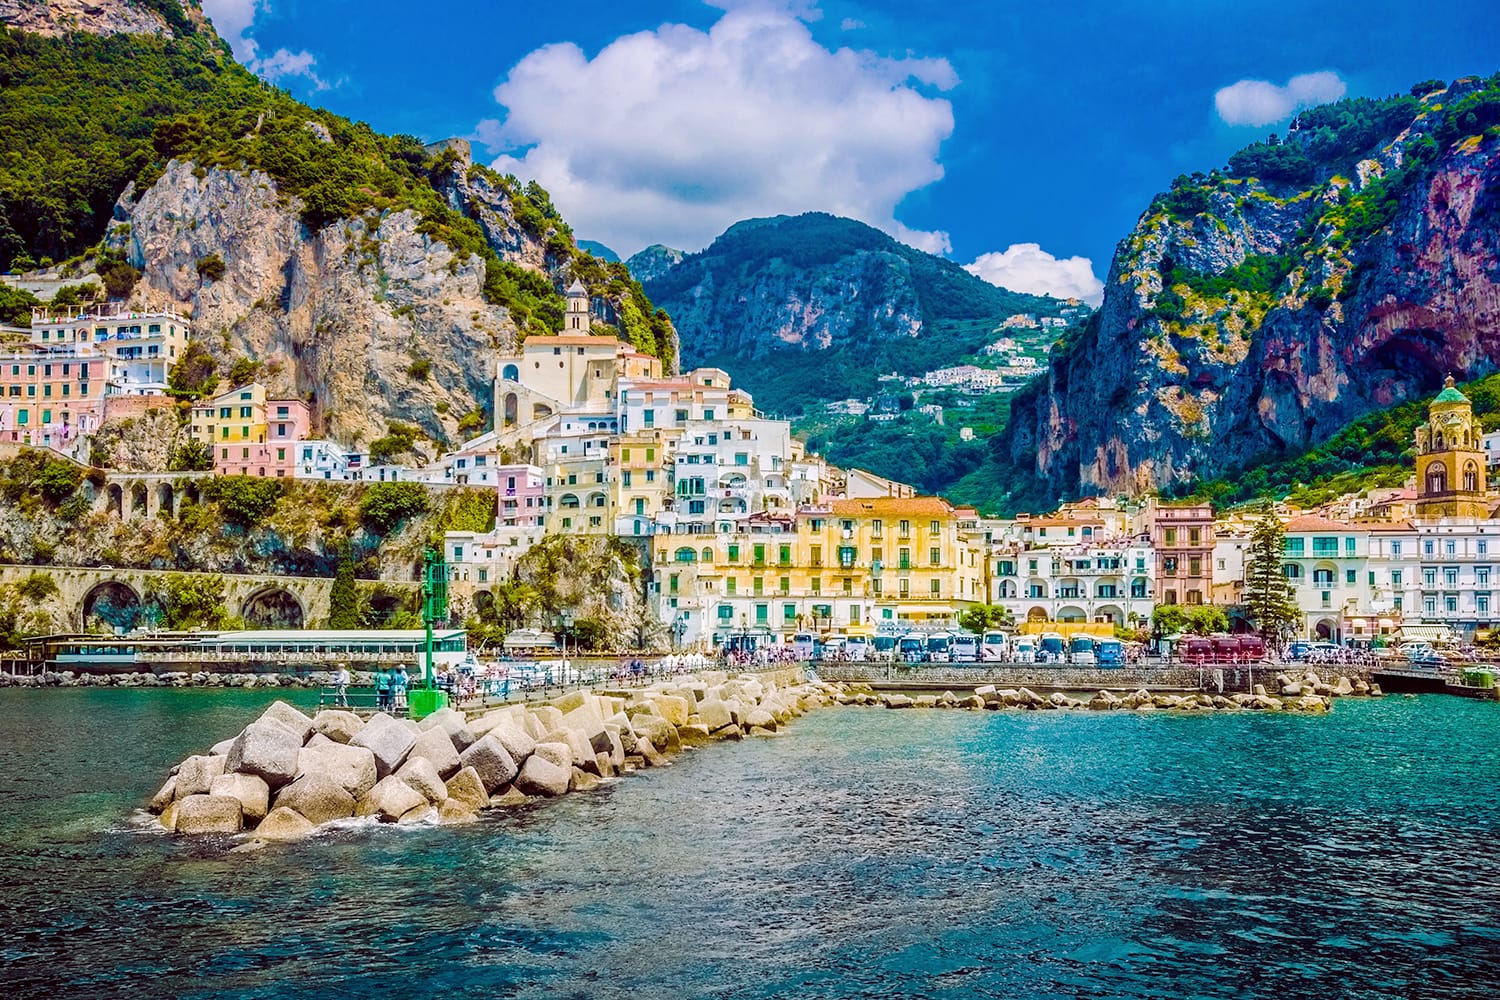 View of Amalfi village in Italy